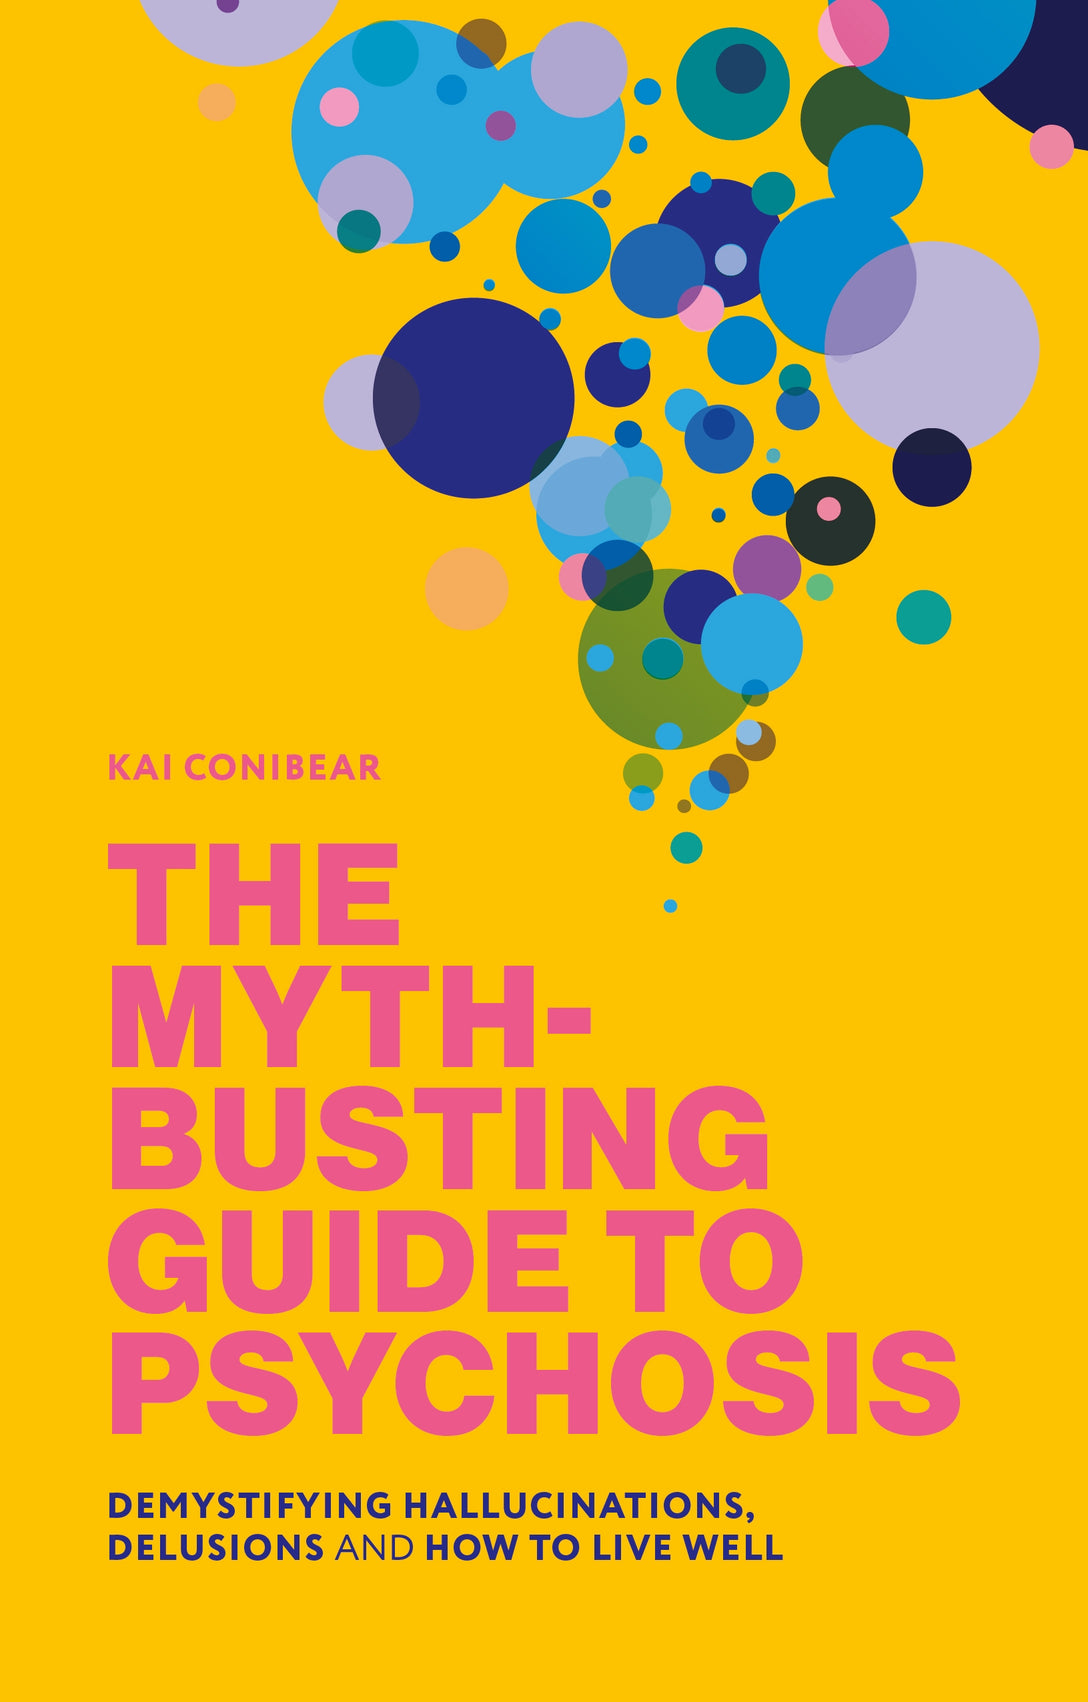 The Myth-Busting Guide to Psychosis by Sameer Jauhar, Kai Conibear